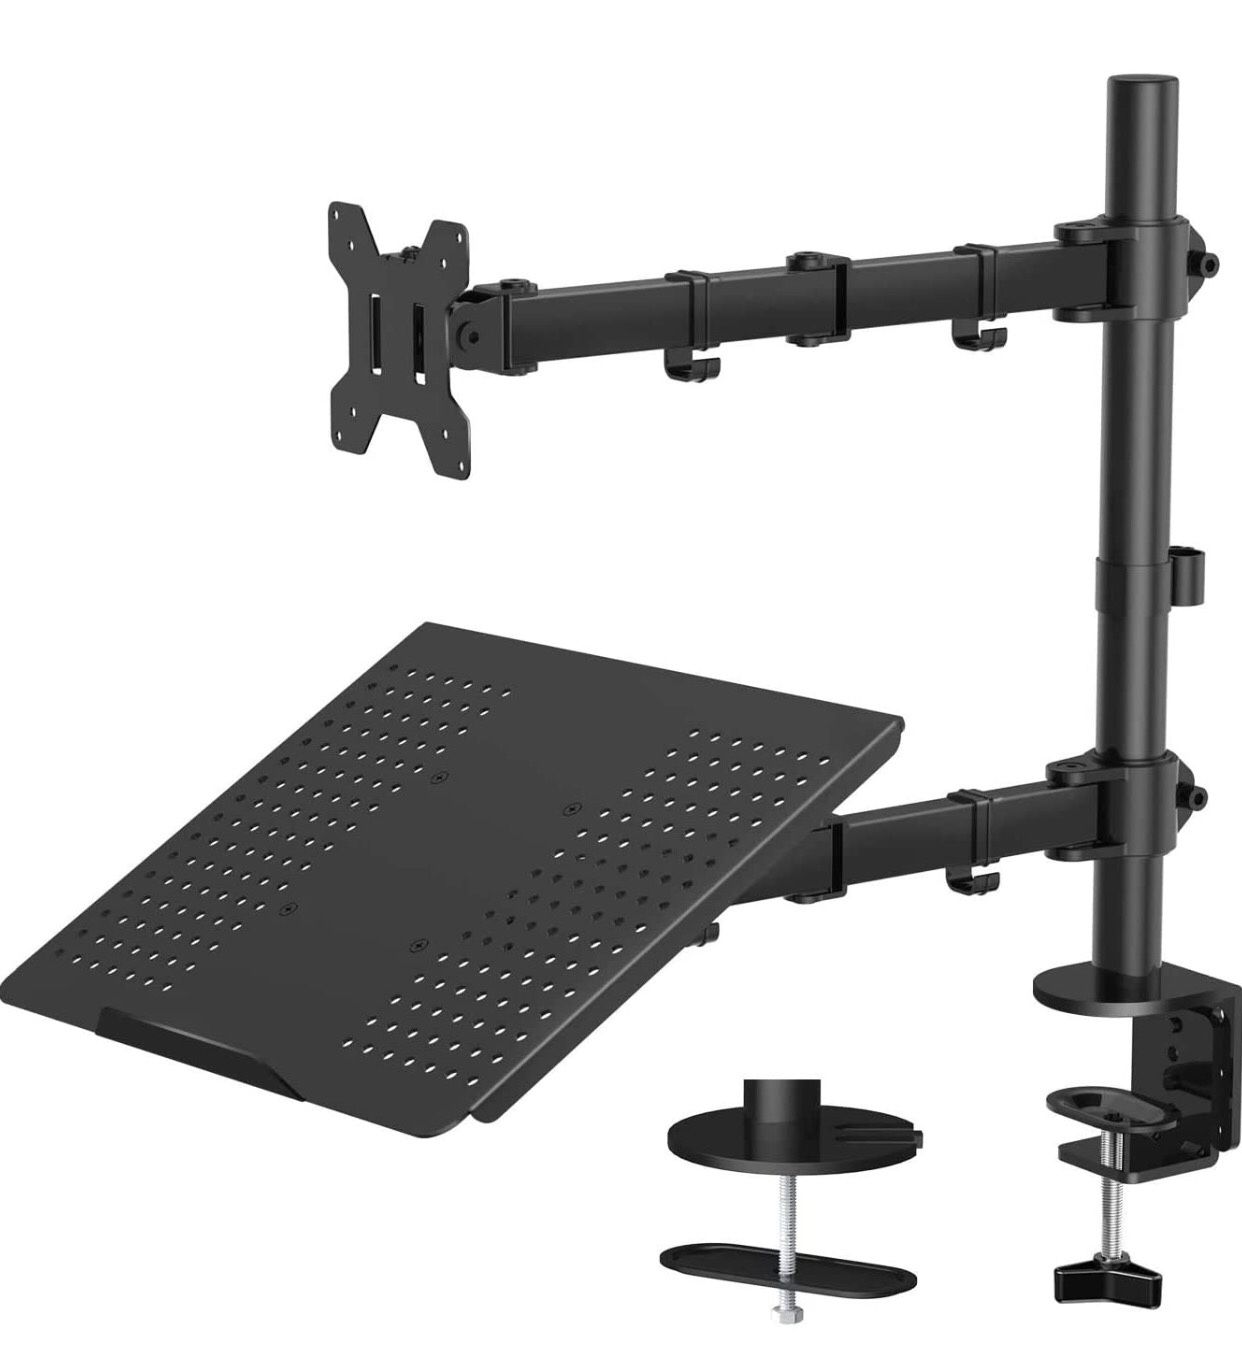 Laptop Monitor Mount Stand with Keyboard Tray, Adjustable Notebook Desk Mount with Clamp and Grommet Mounting Base for 13 to 27 Inch LCD Computer Scr